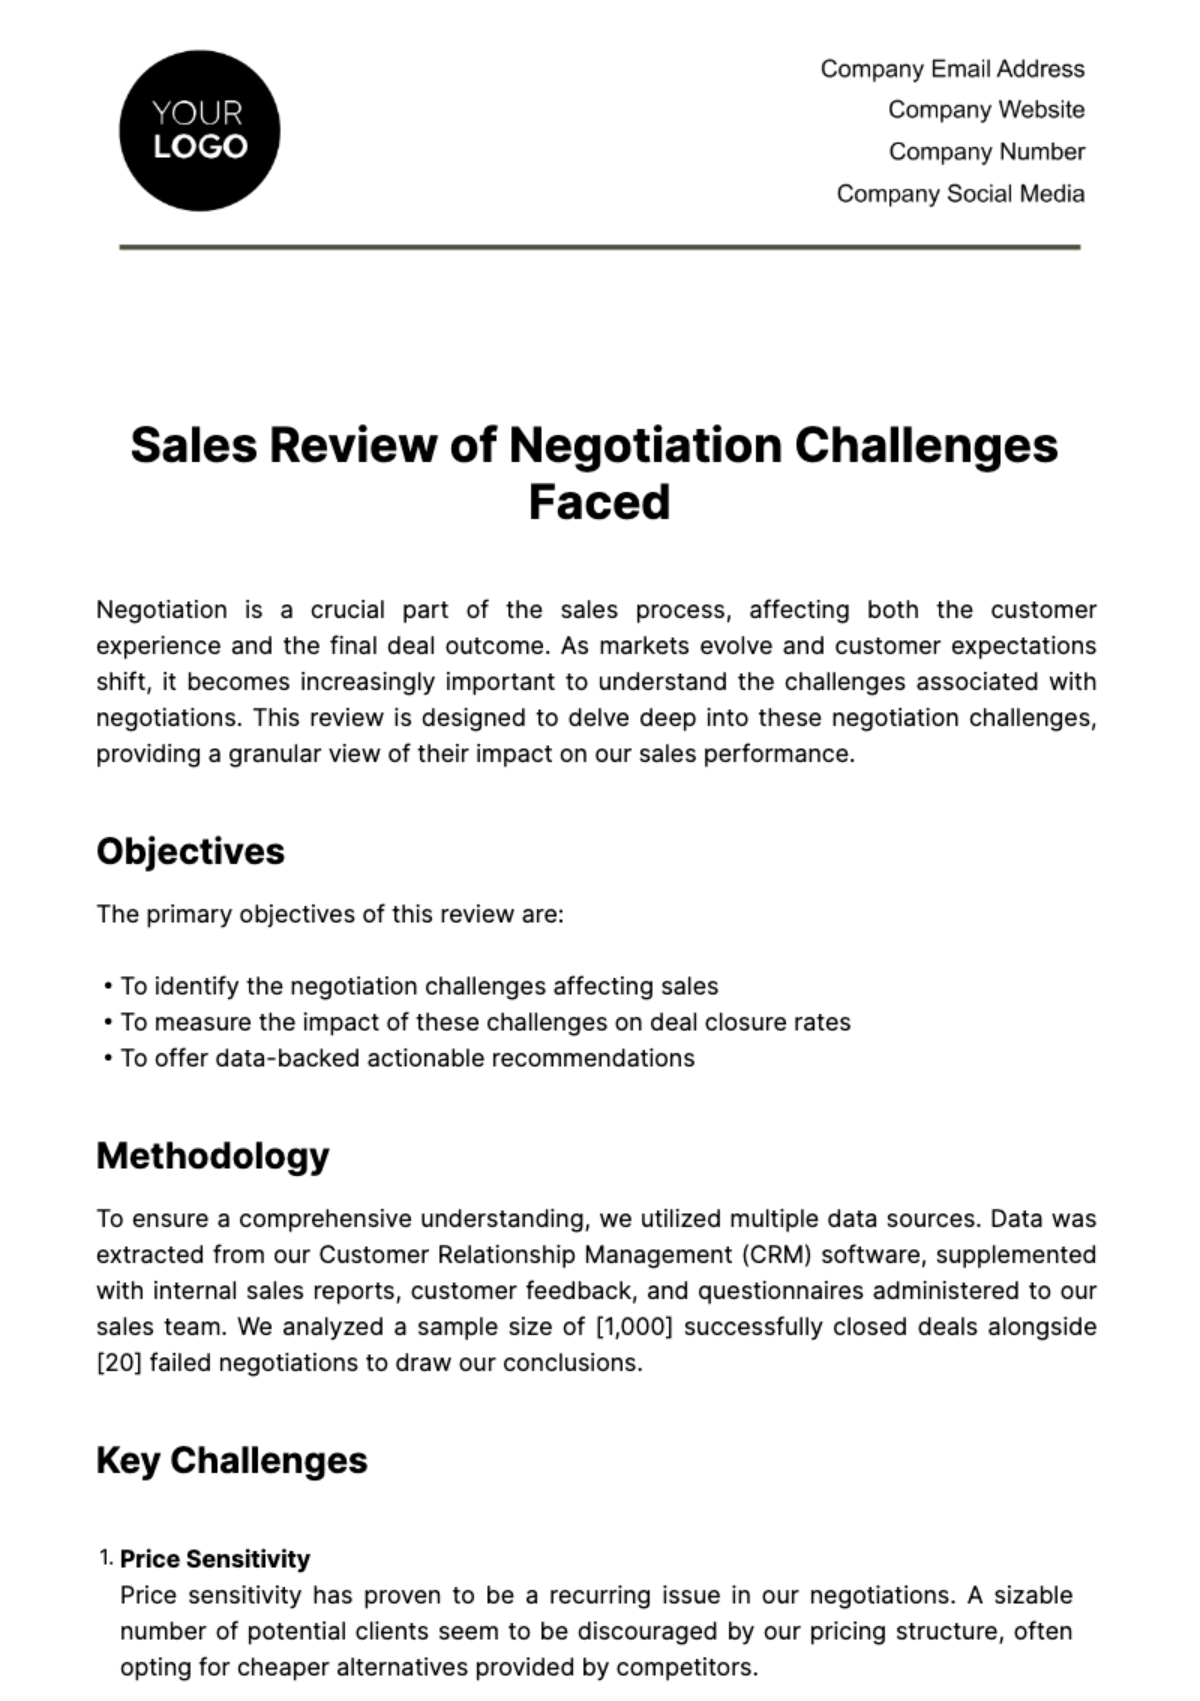 Free Sales Review of Negotiation Challenges Faced Template